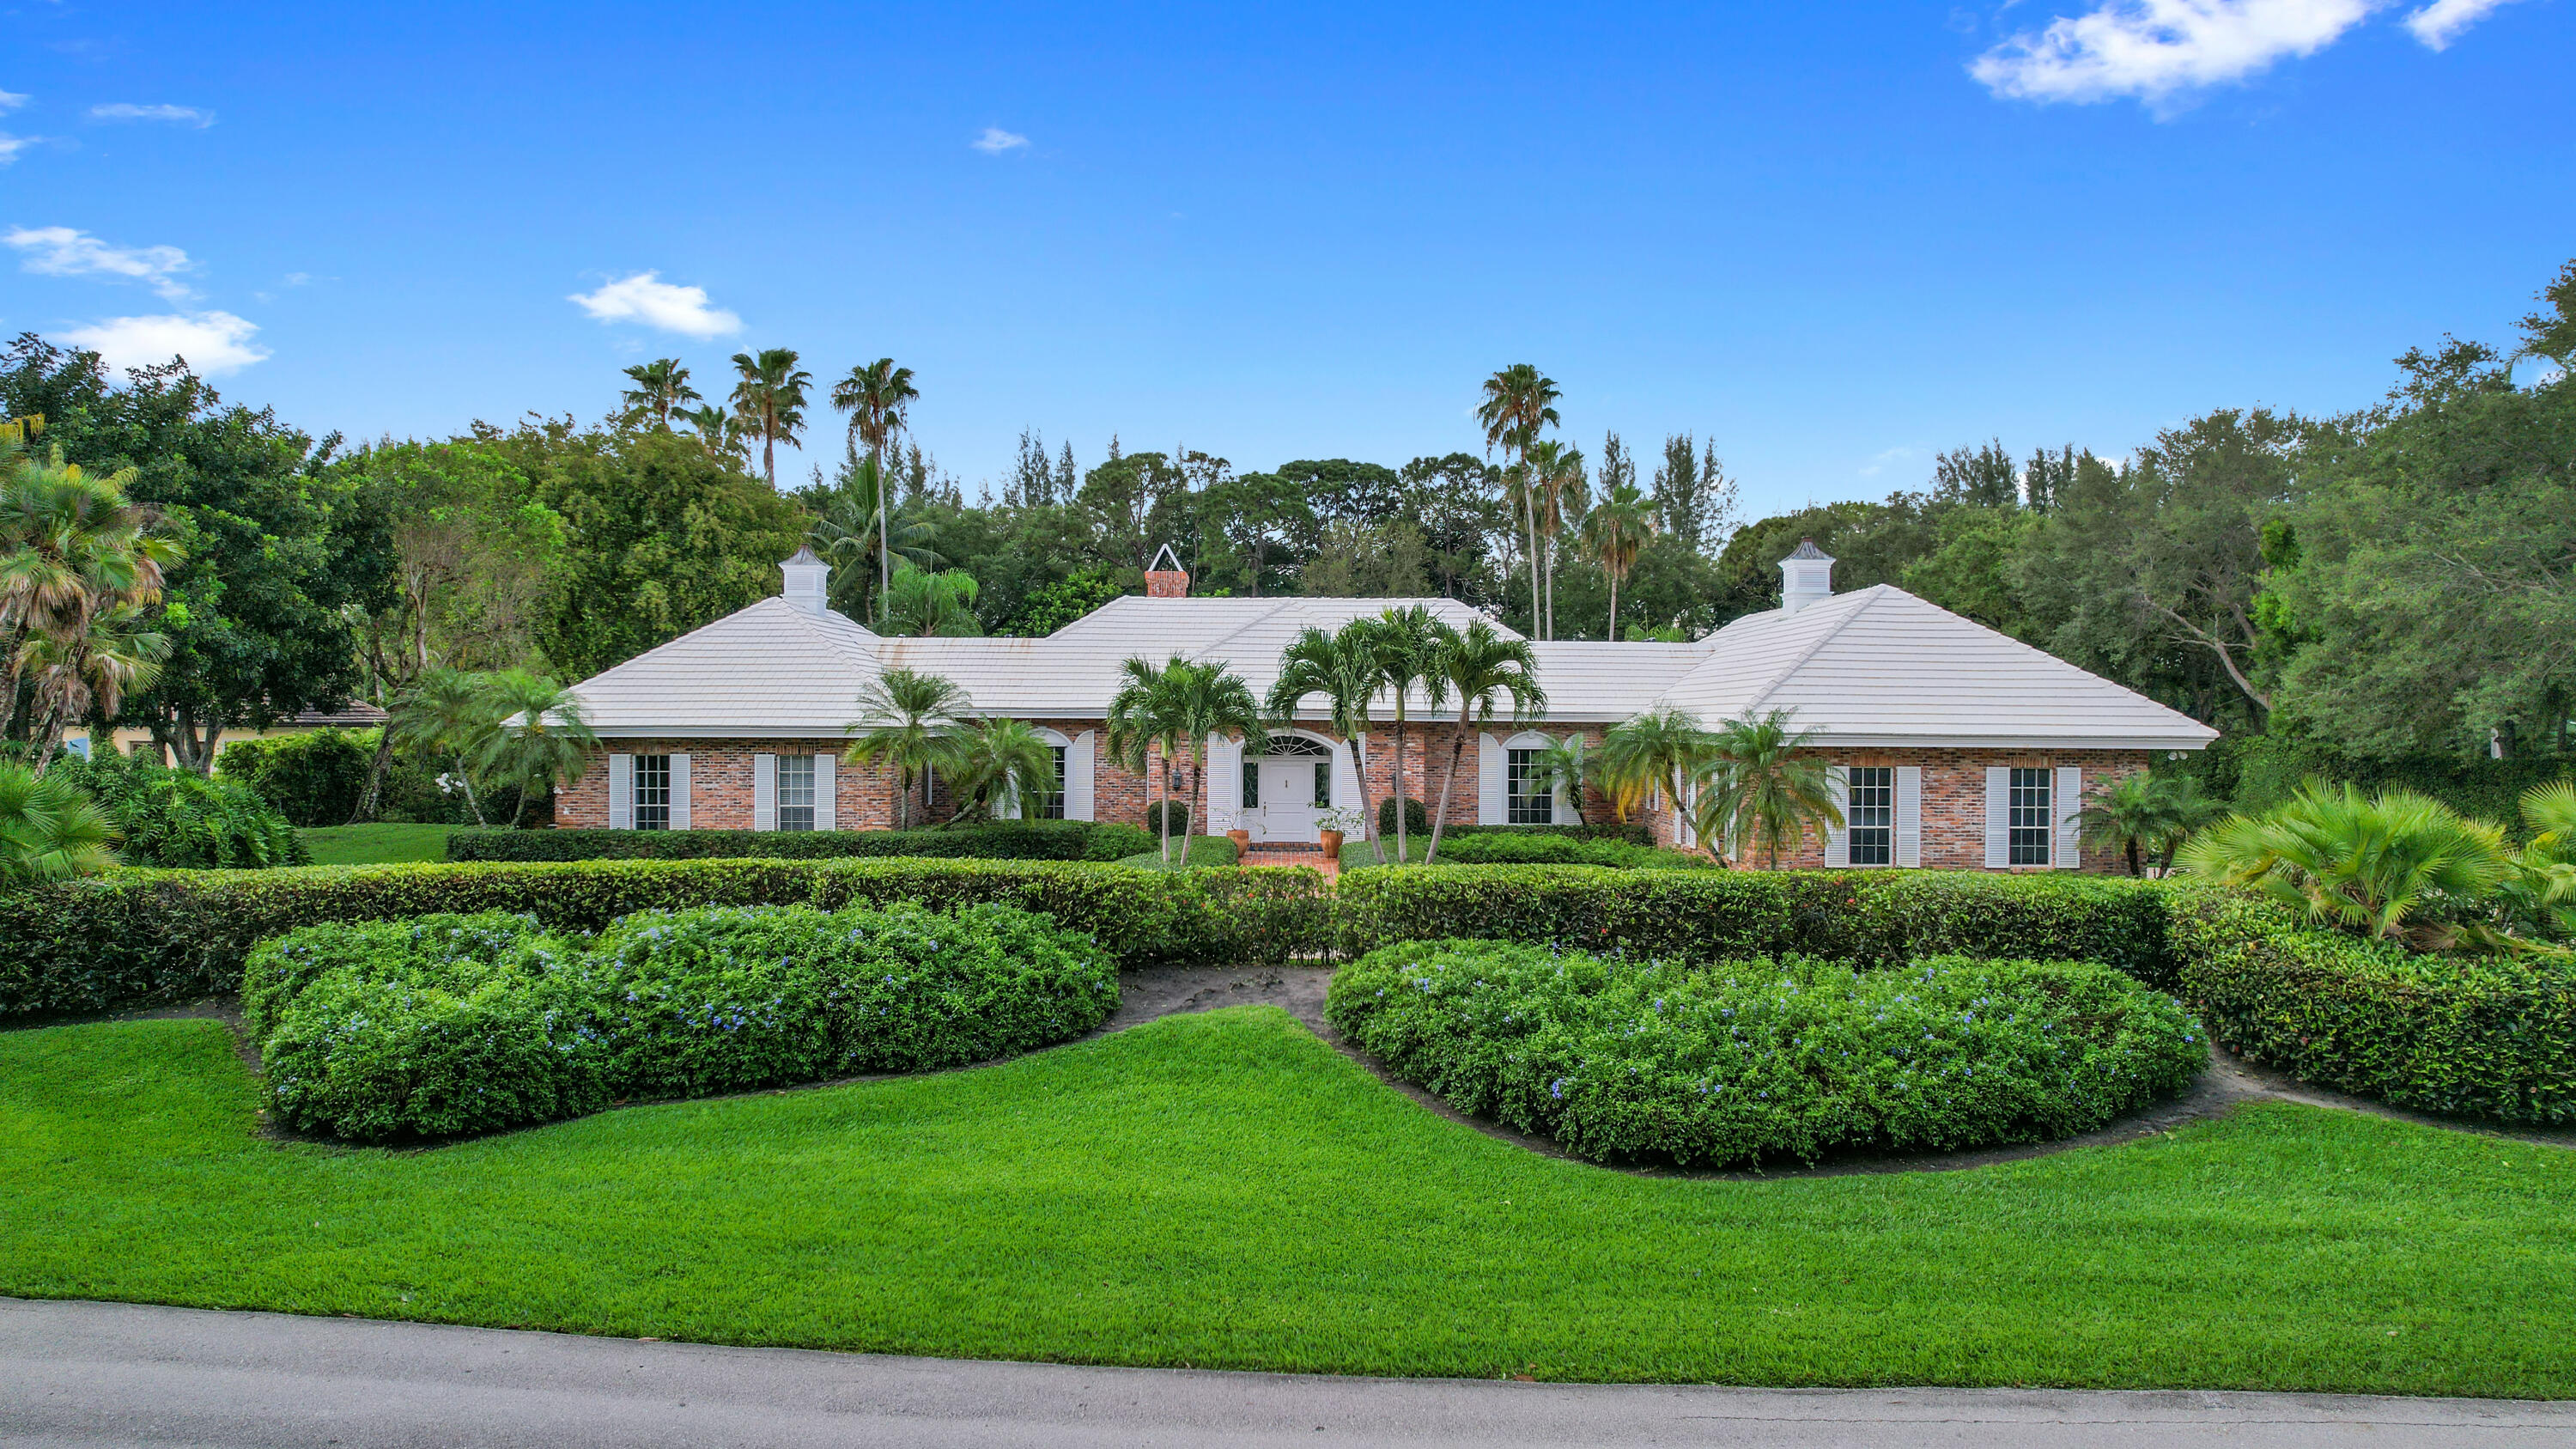 58 Country Road, Village Of Golf, Palm Beach County, Florida - 5 Bedrooms  
6.5 Bathrooms - 